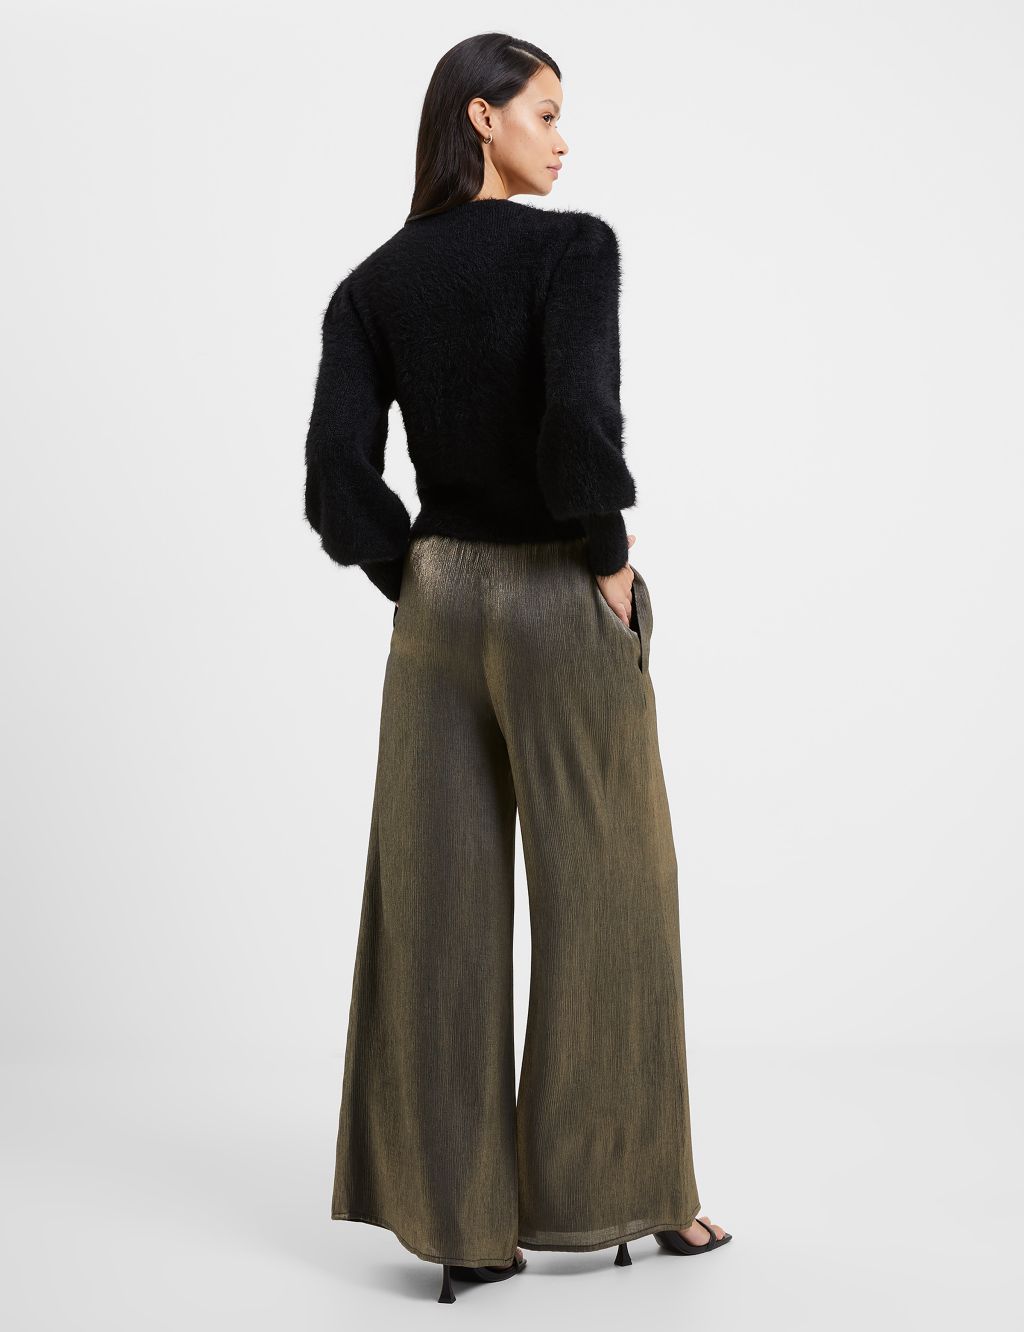 Sparkly Elasticated Waist Wide Leg Trousers image 4